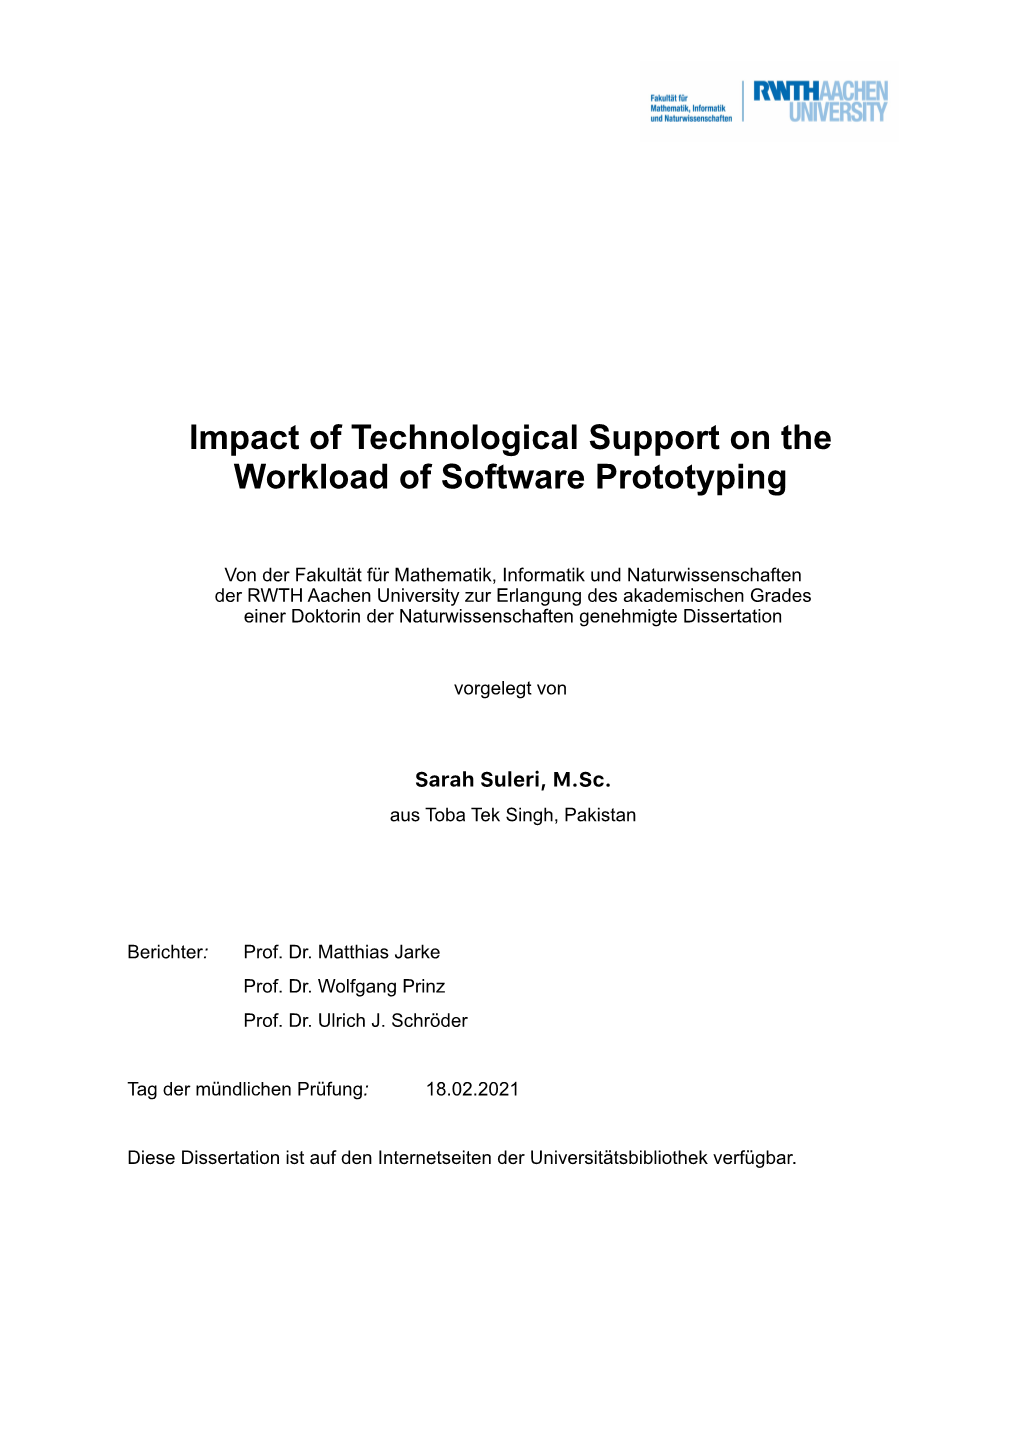 Impact of Technological Support on the Workload of Software Prototyping